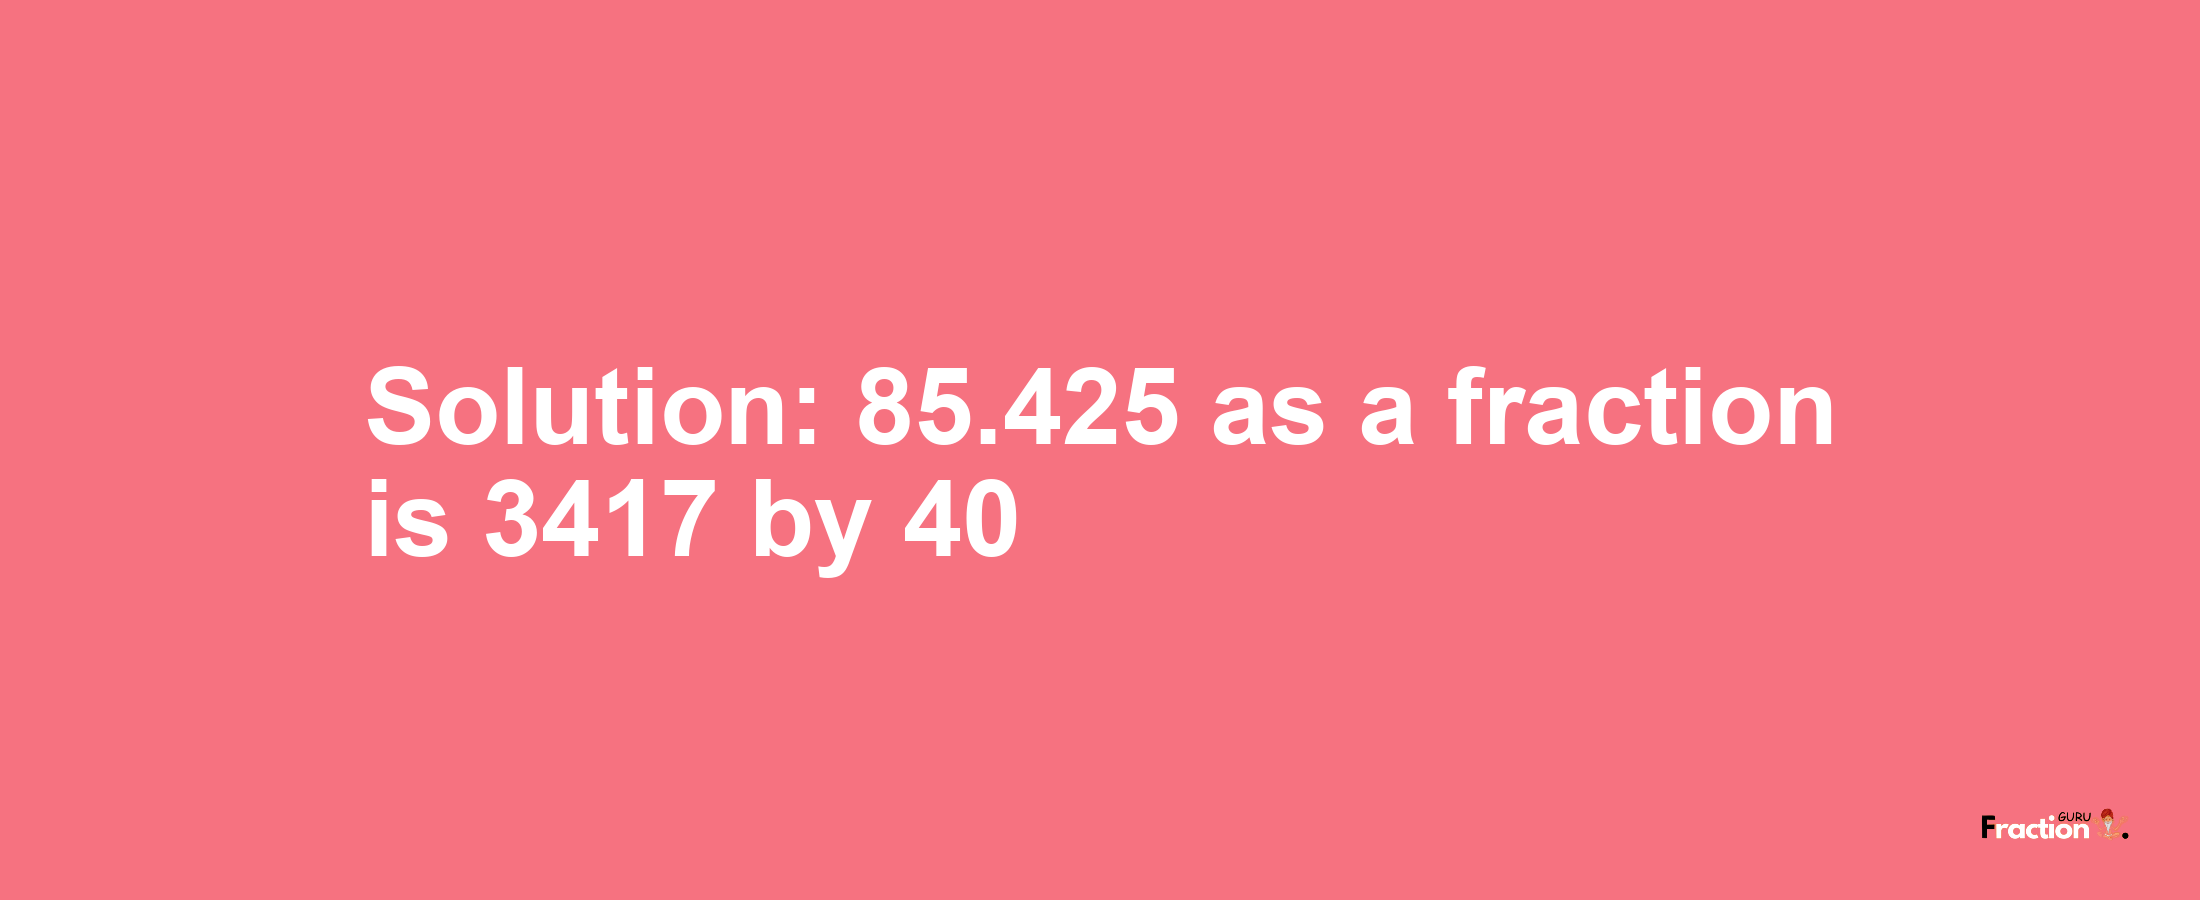 Solution:85.425 as a fraction is 3417/40